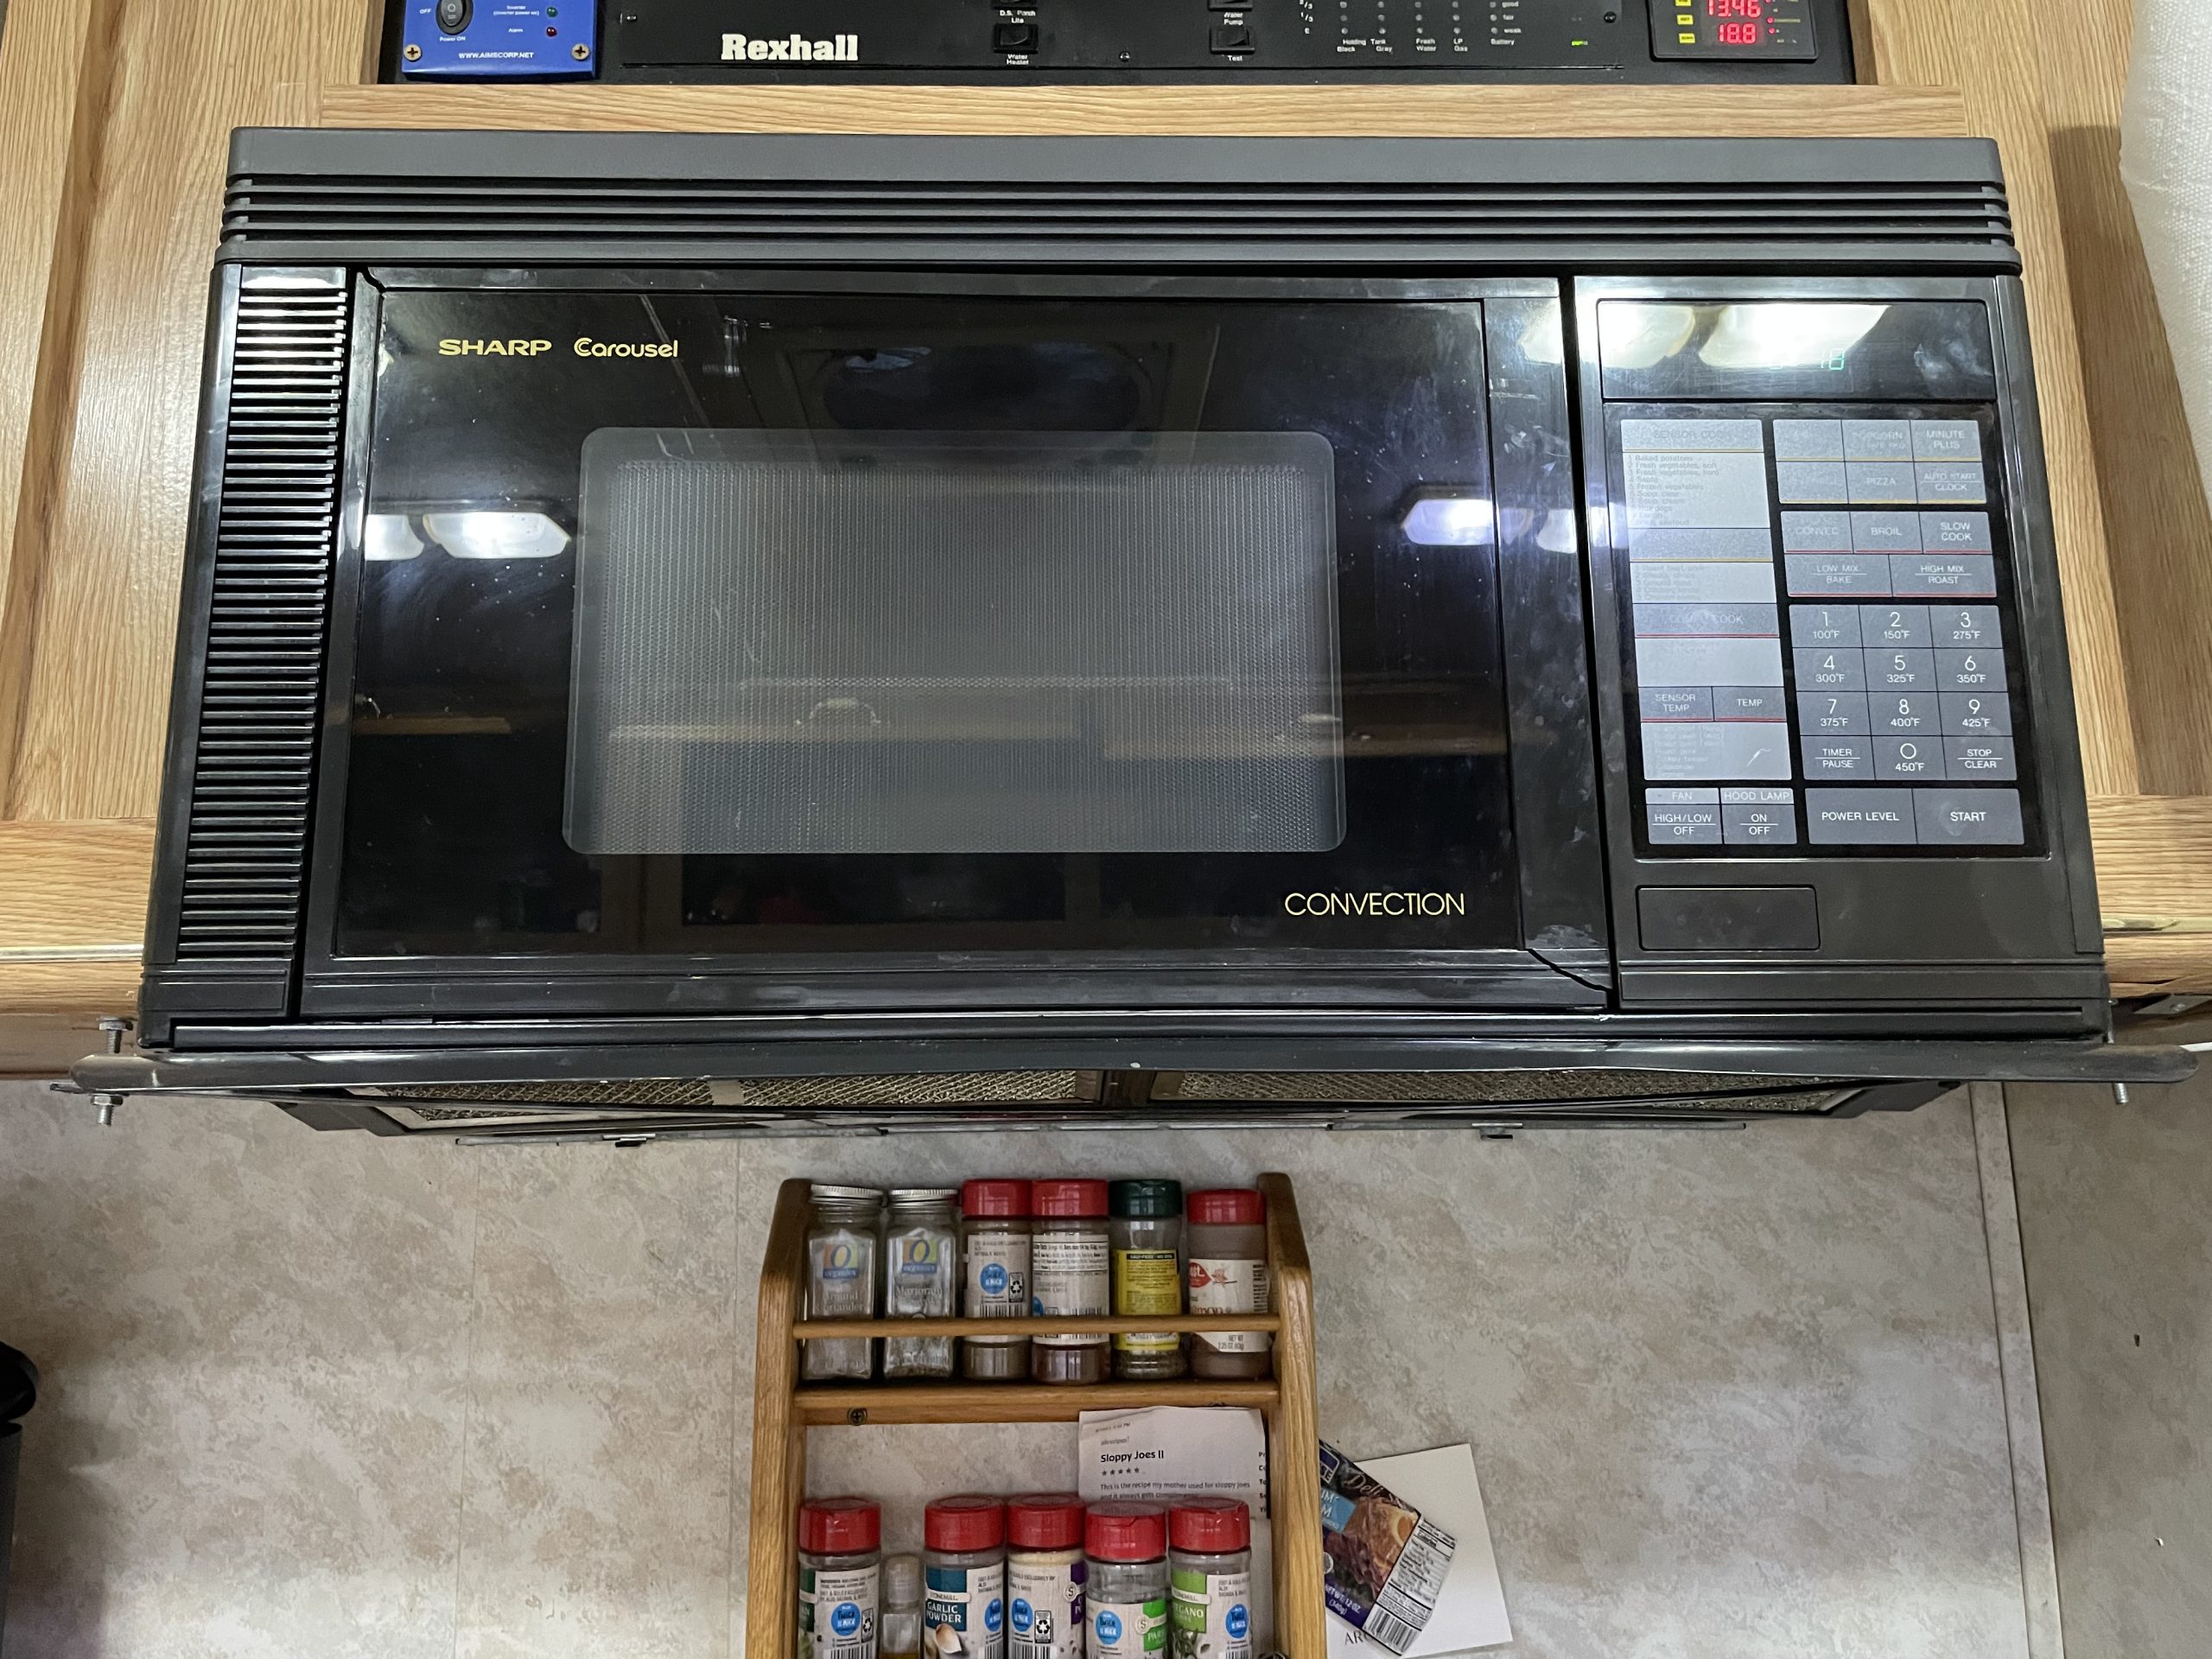 New Microwave Mount